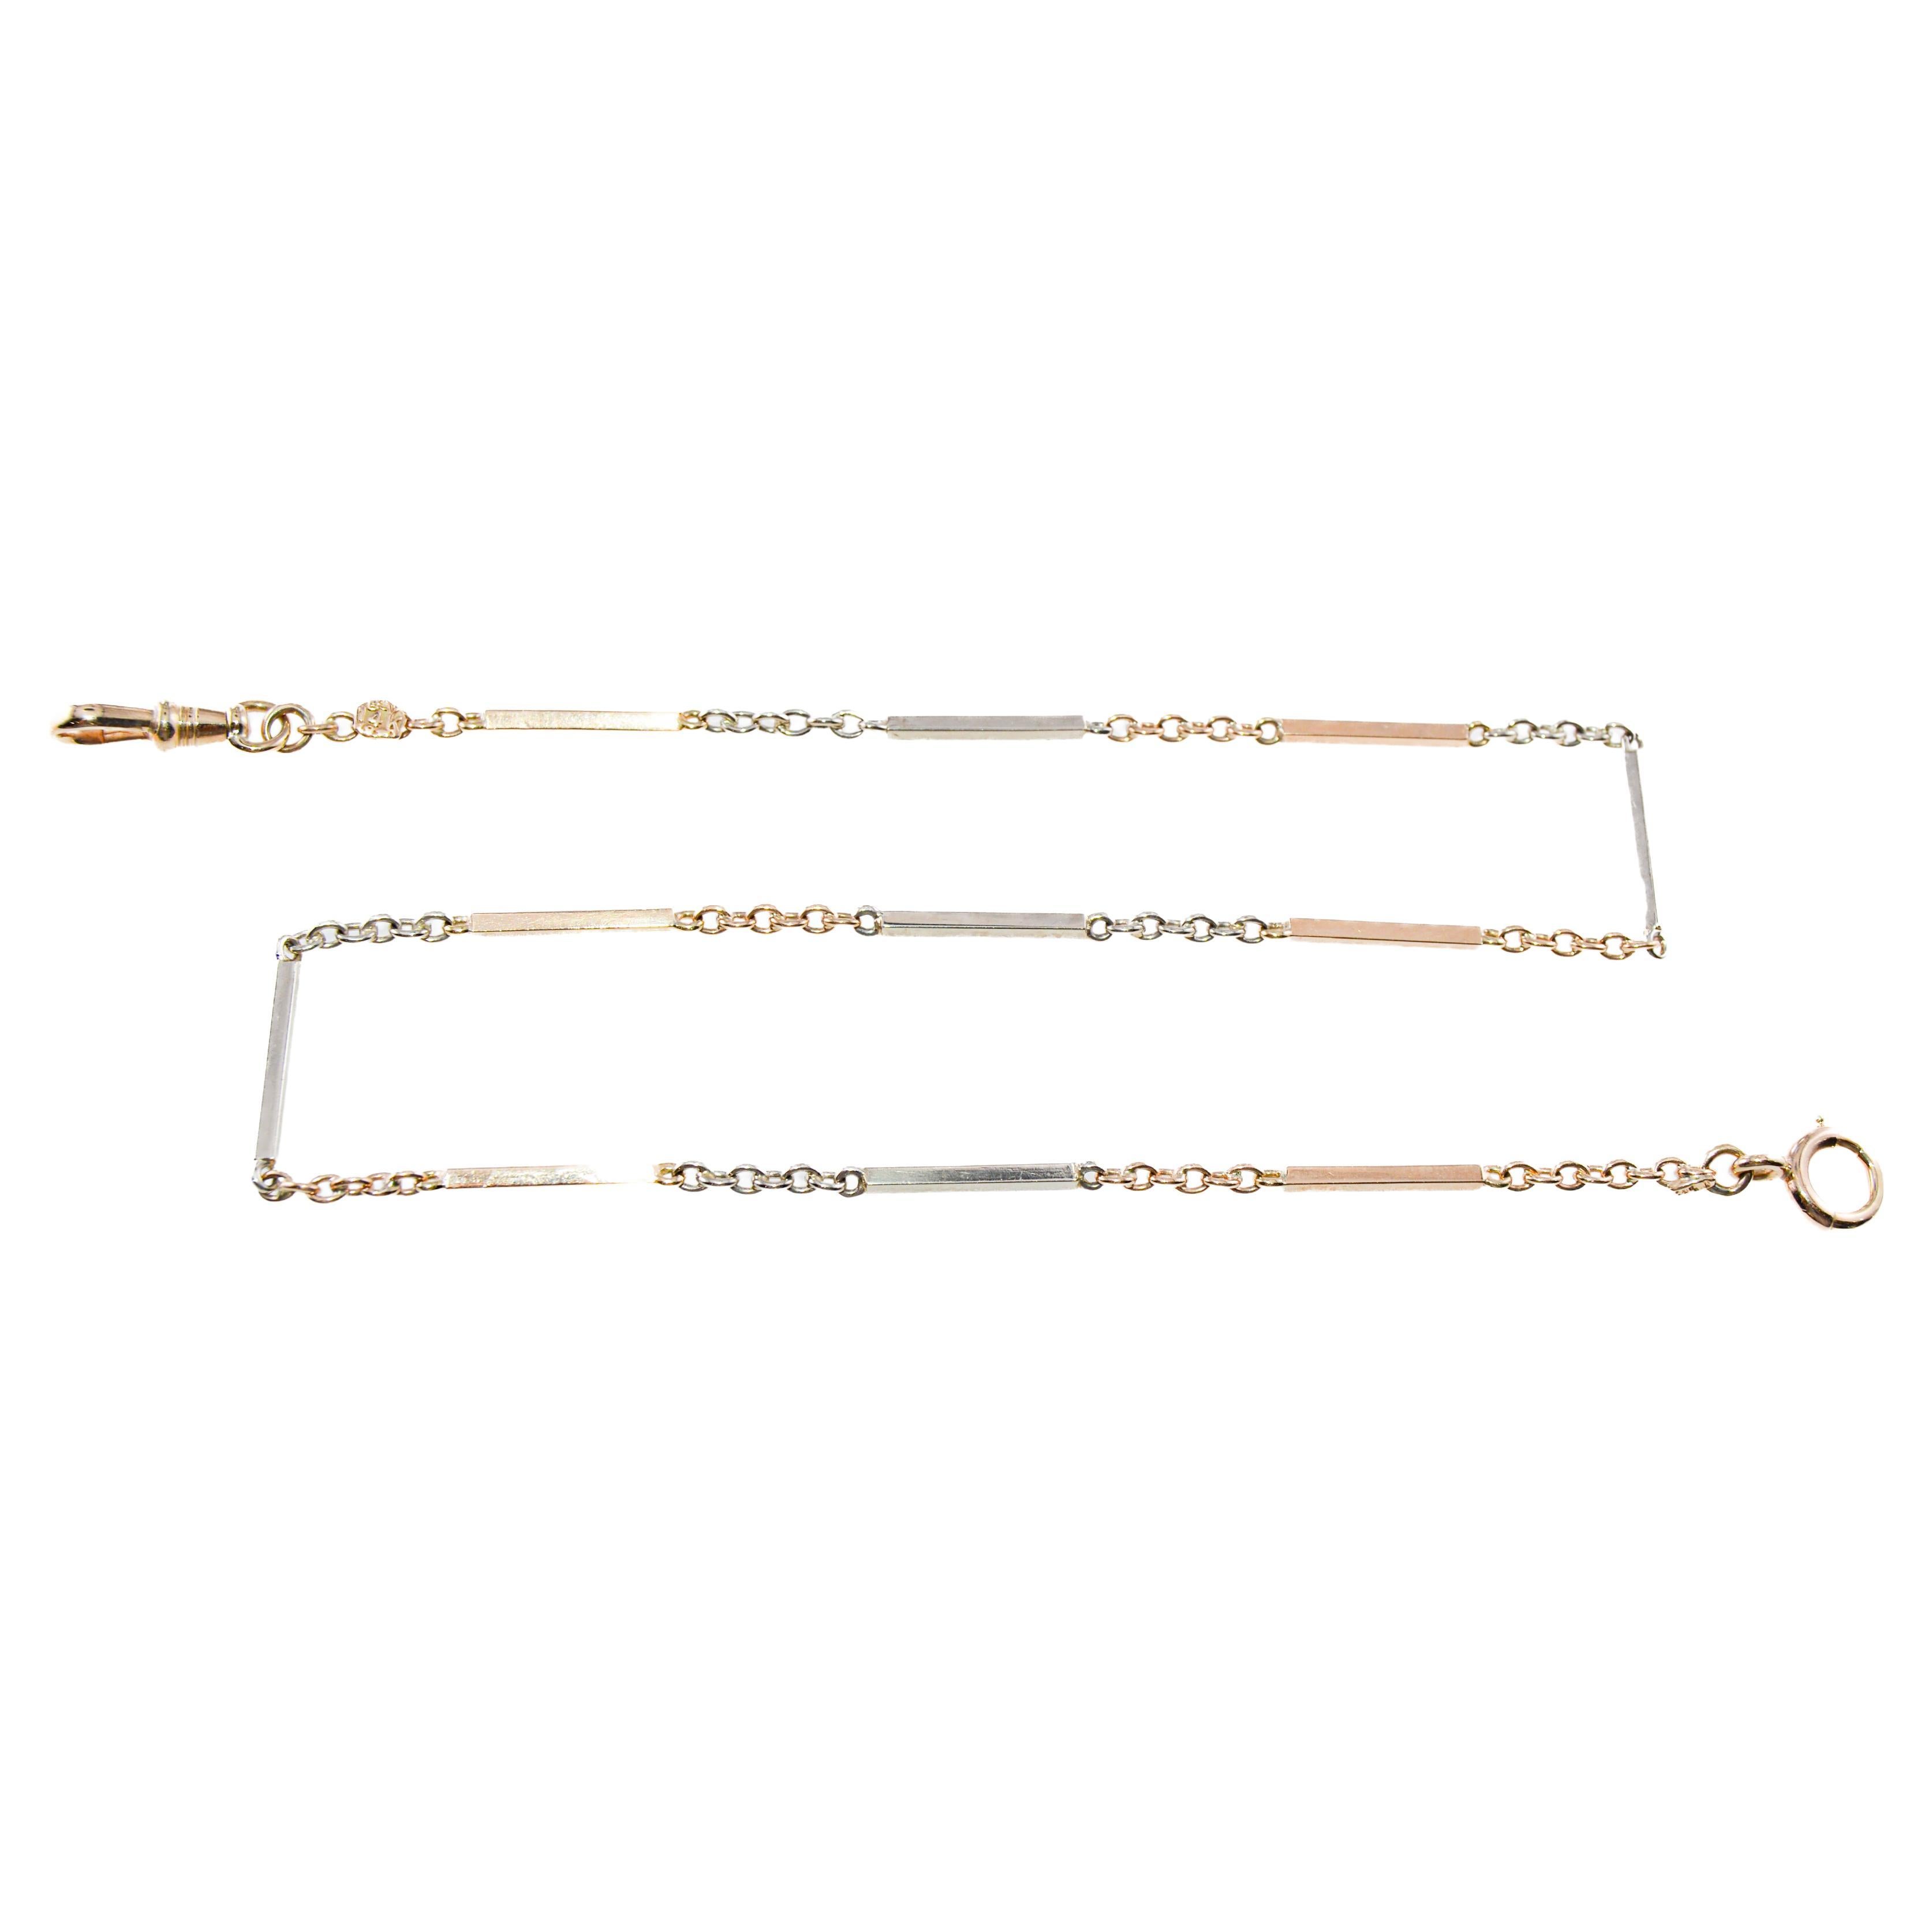 Two Tone 14Kt White & Yellow Gold Necklace, Bracelet or Pocket Watch Chain 1930s For Sale